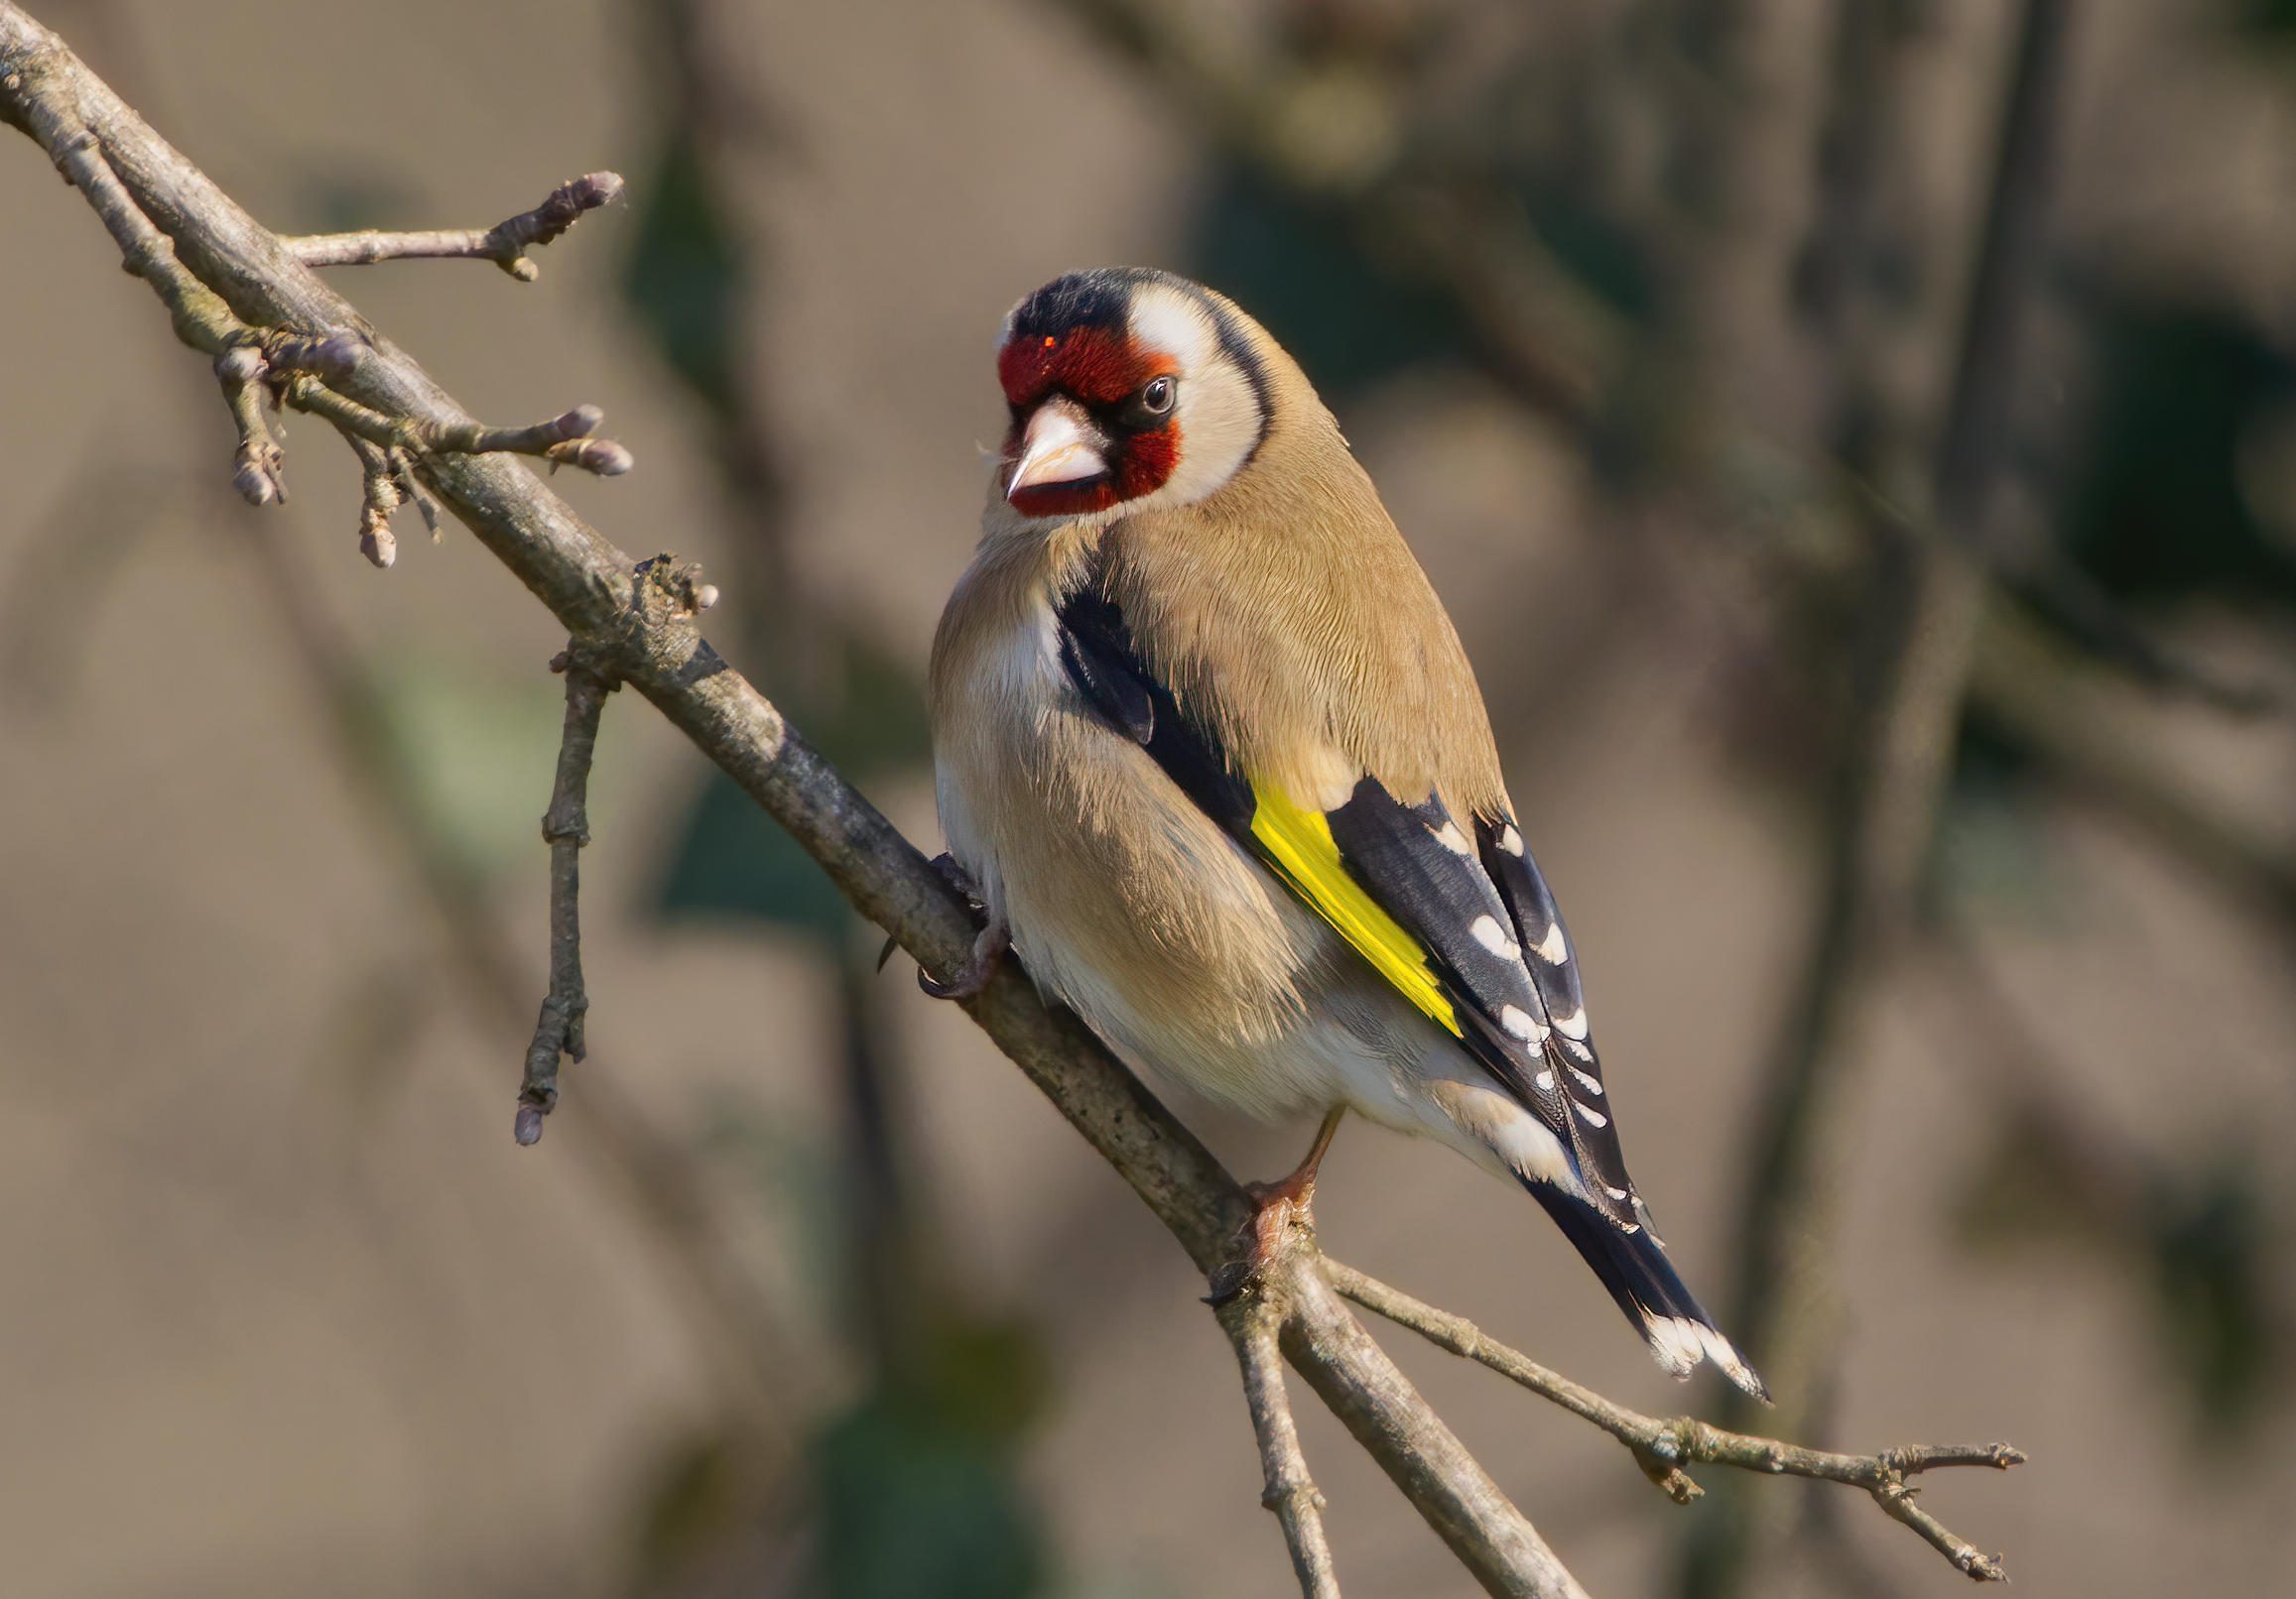 The goldfinch...